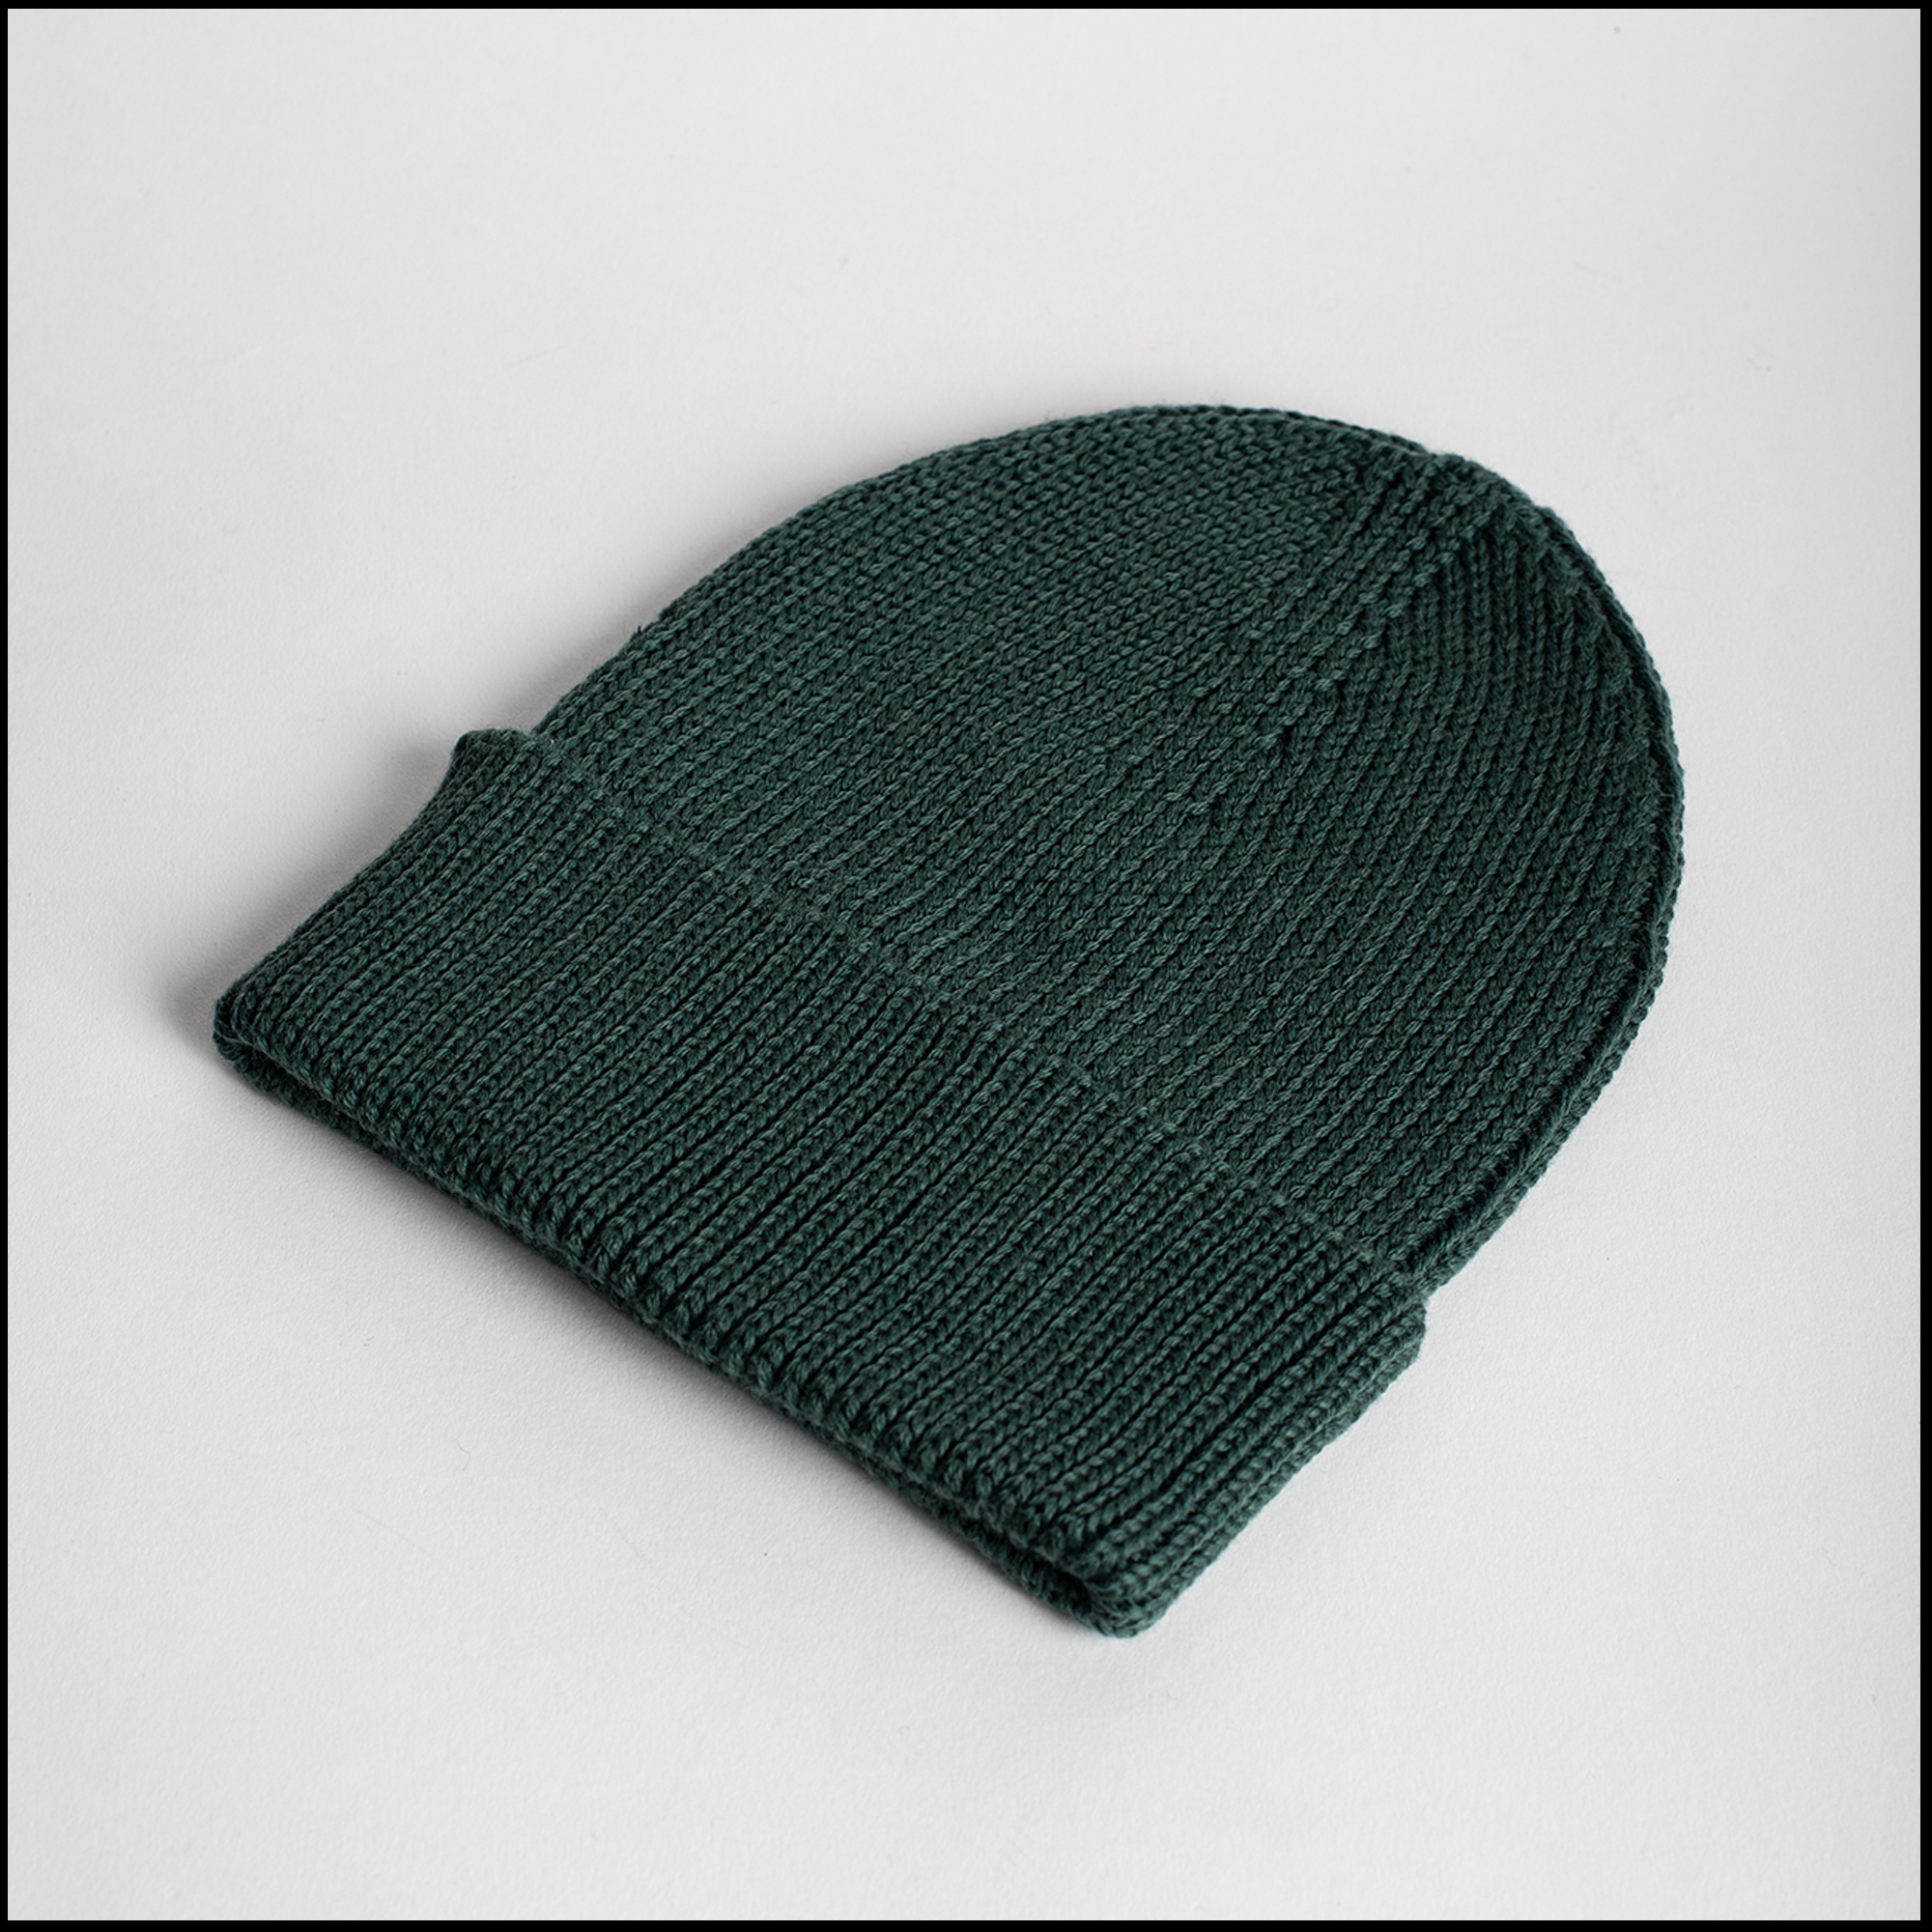 VICKO beanie in Emerald color by Arpenteur